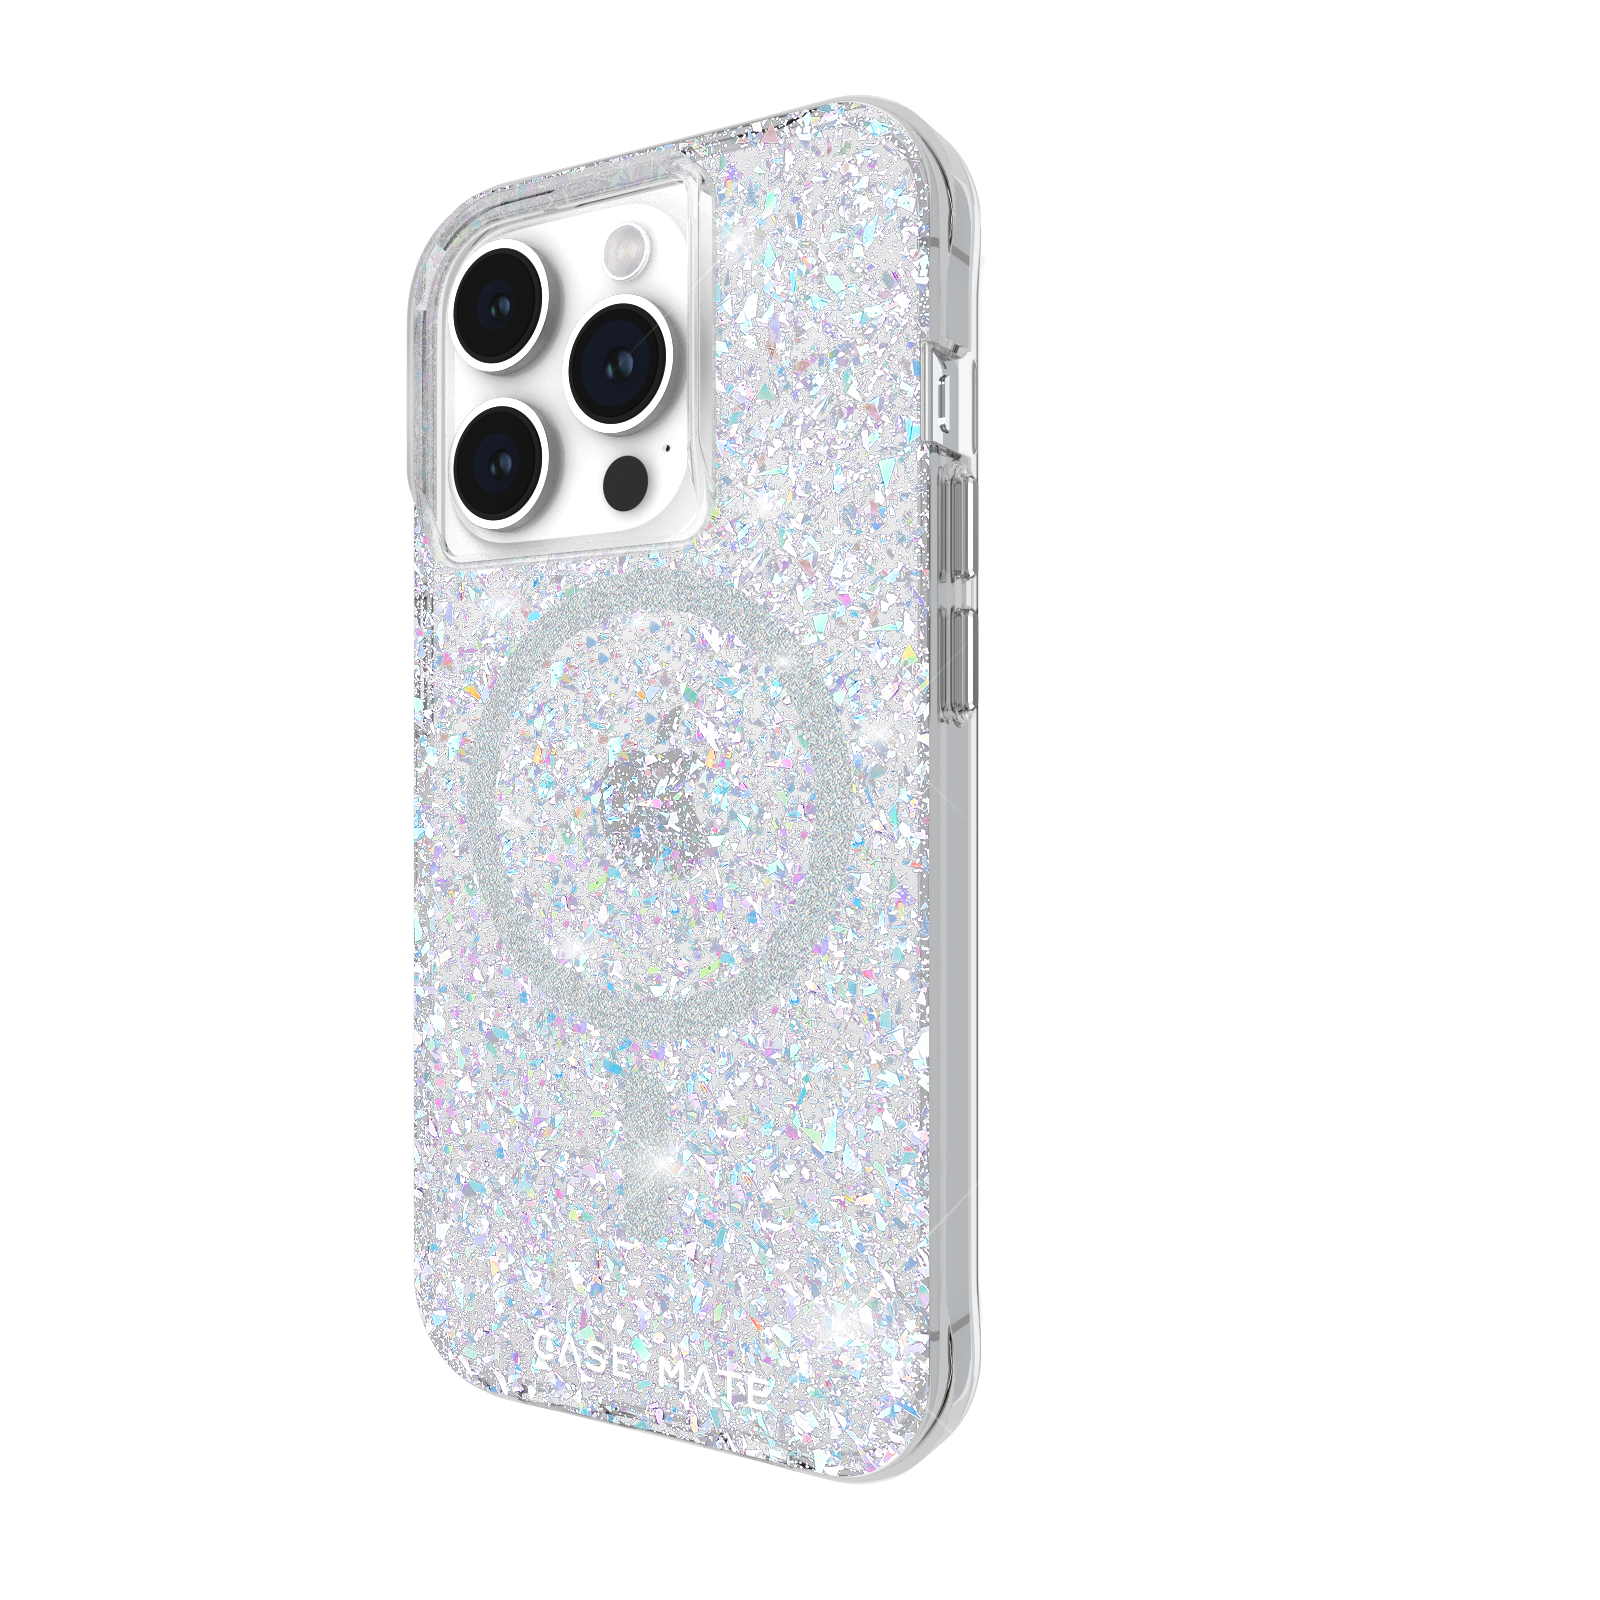 CASE-MATE Pro, Glitzer Apple, 15 iPhone Twinkle, Backcover,